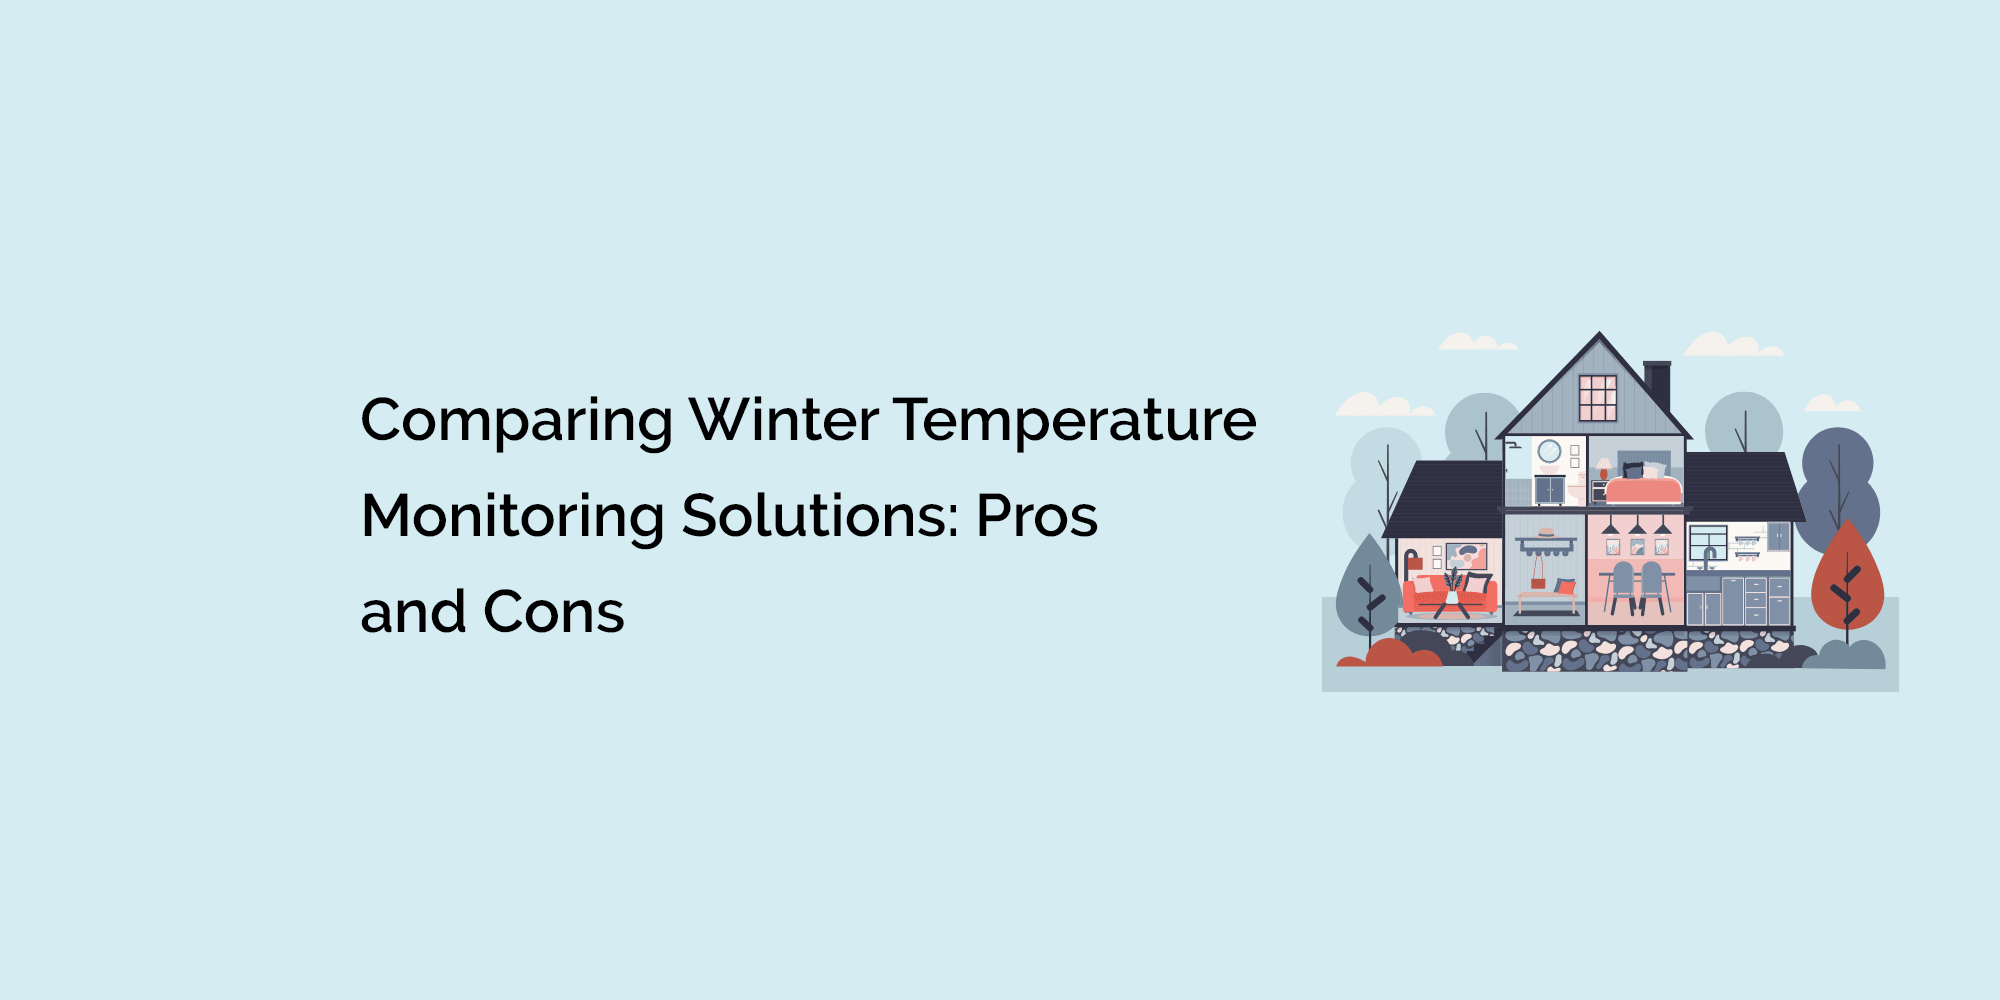 Comparing Winter Temperature Monitoring Solutions: Pros and Cons